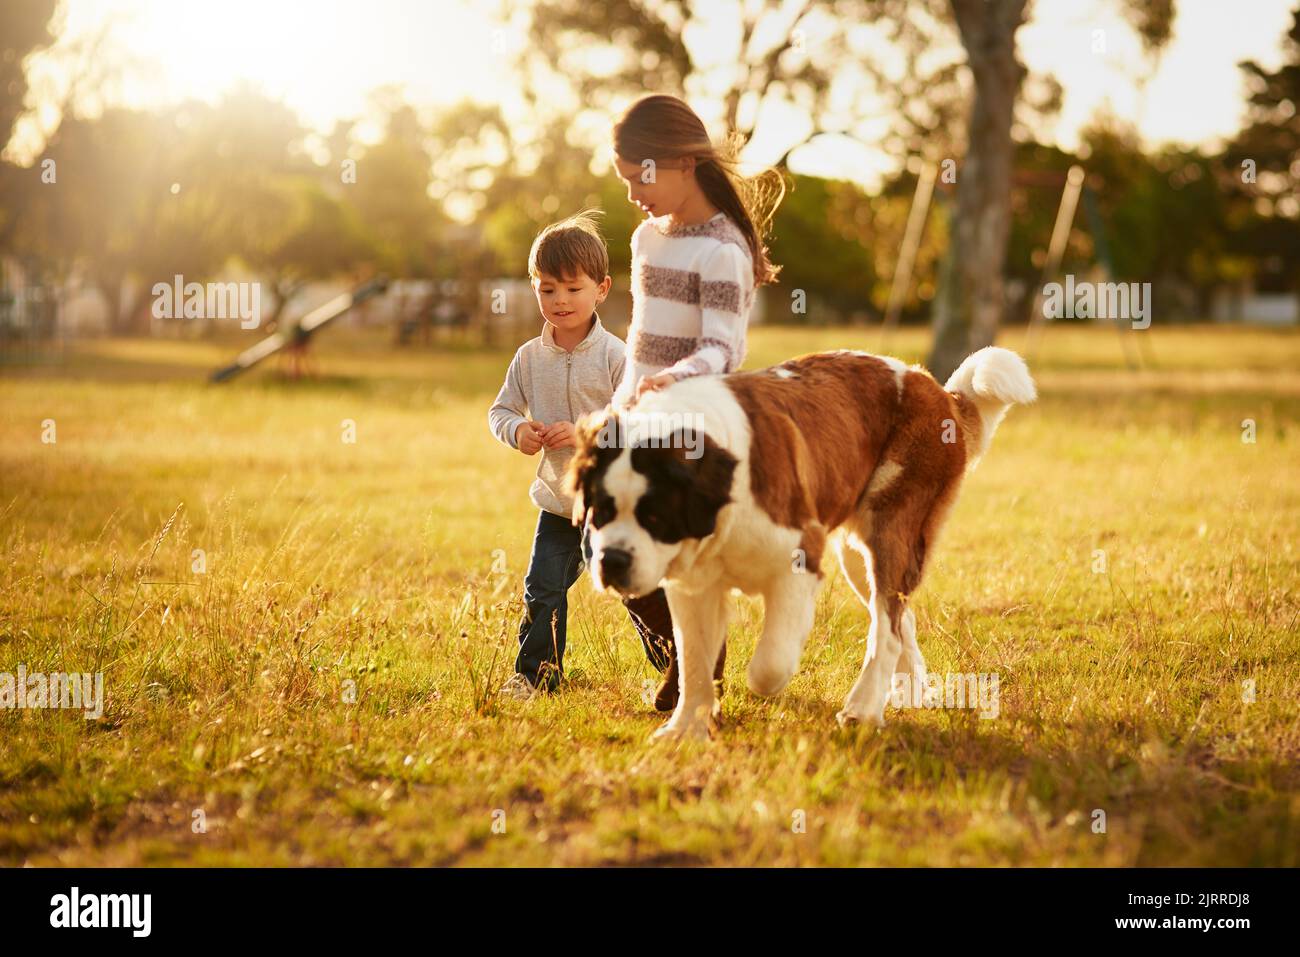 Looking for adventure together. two cute little siblings walking through a park with their dog. Stock Photo